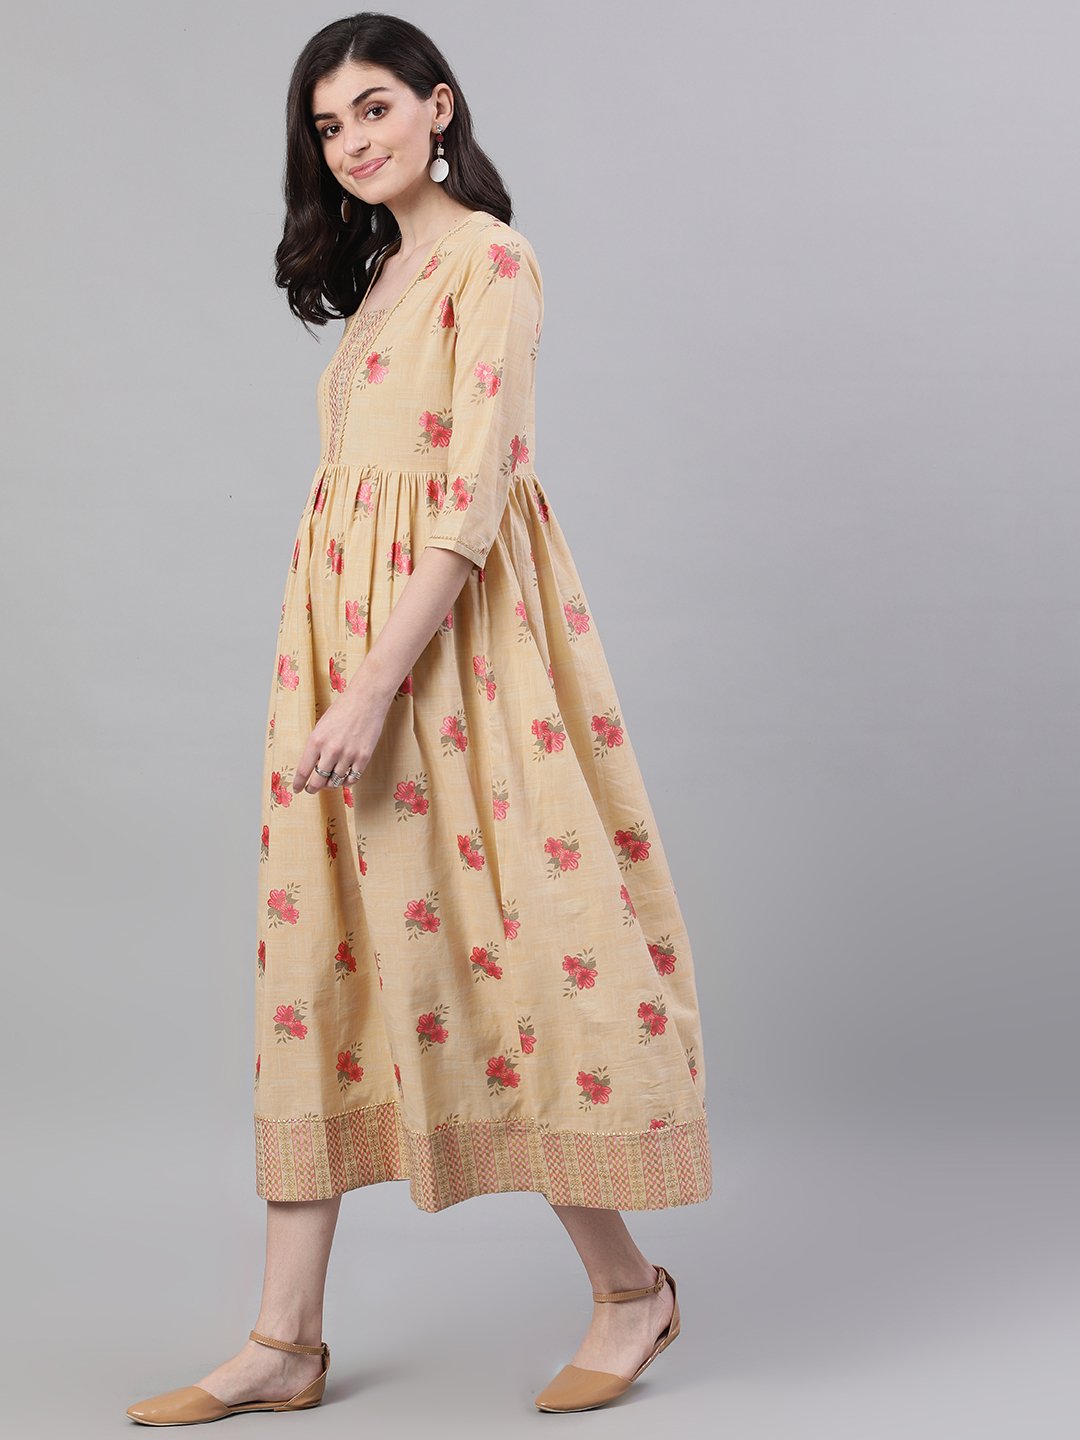 Women's Yellow Floral Printed Square Neck Cotton Maxi Dress - Nayo Clothing